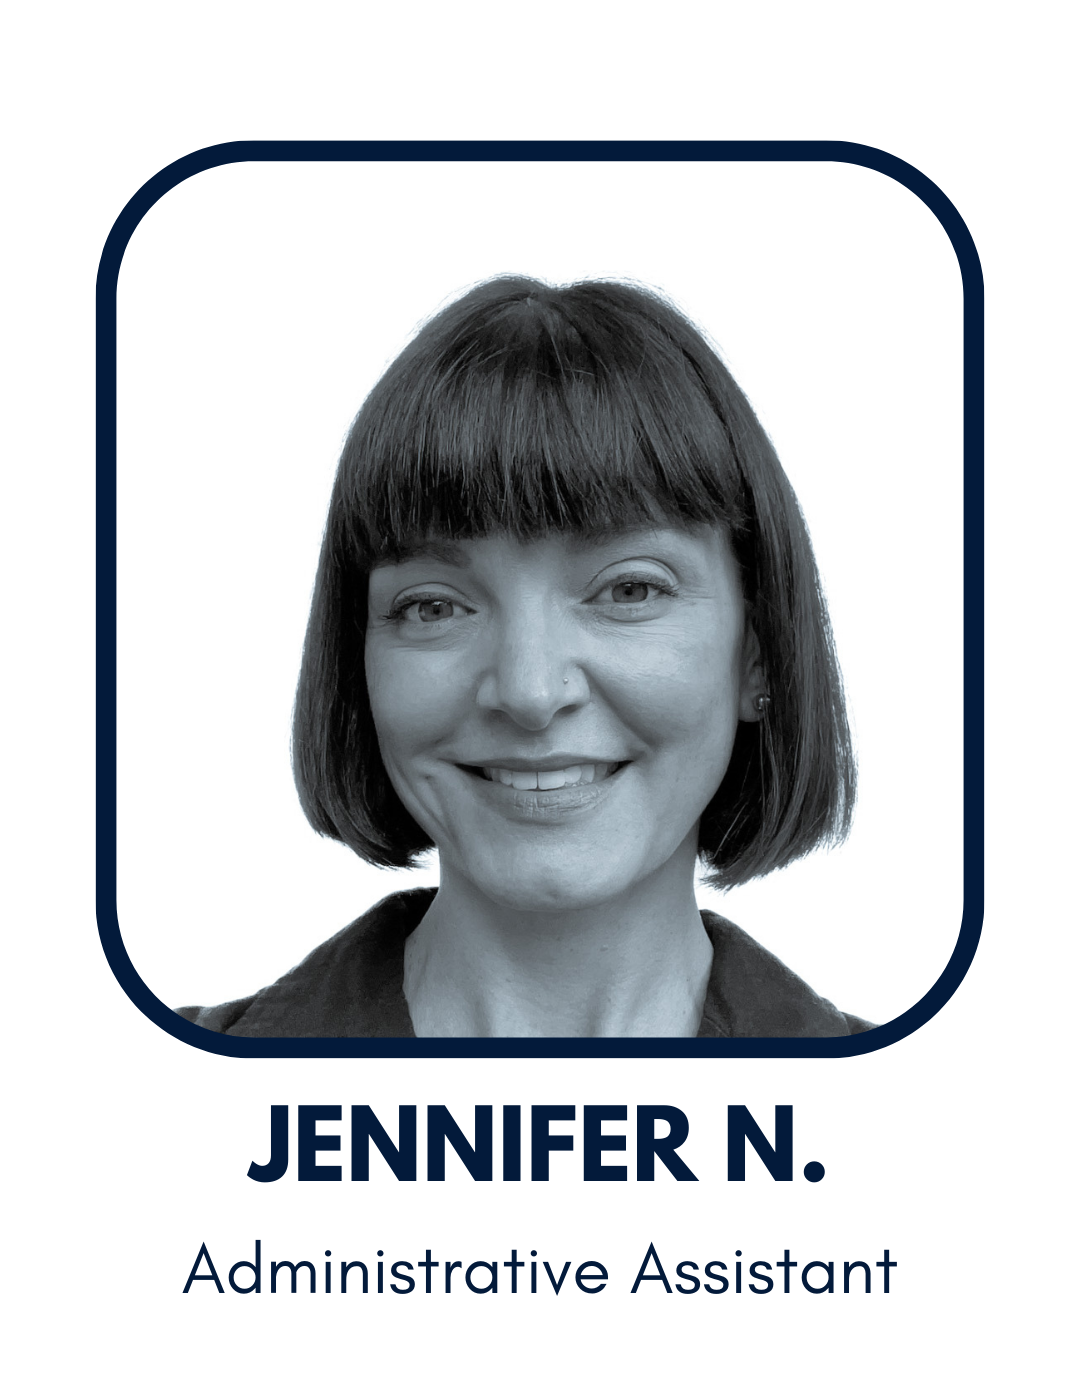 Jennifer N., Administrative Assistant at 4Dbiz. Specialties include FF&E support for interior designers, administrative assistant for interior designers, and more.